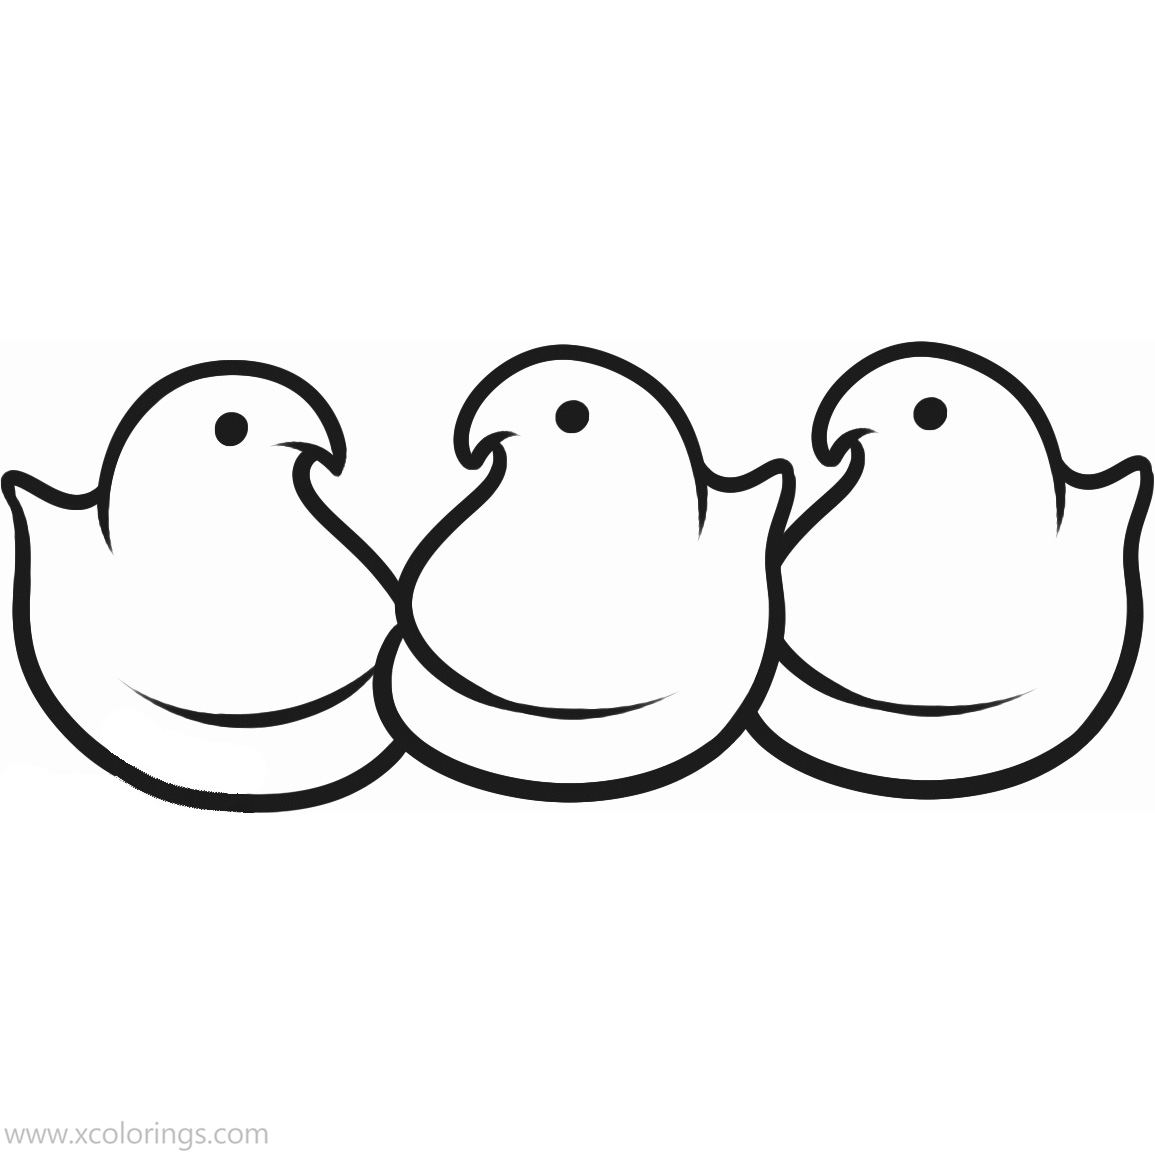 Free Marshmallow Peeps Coloring Pages Chicks printable